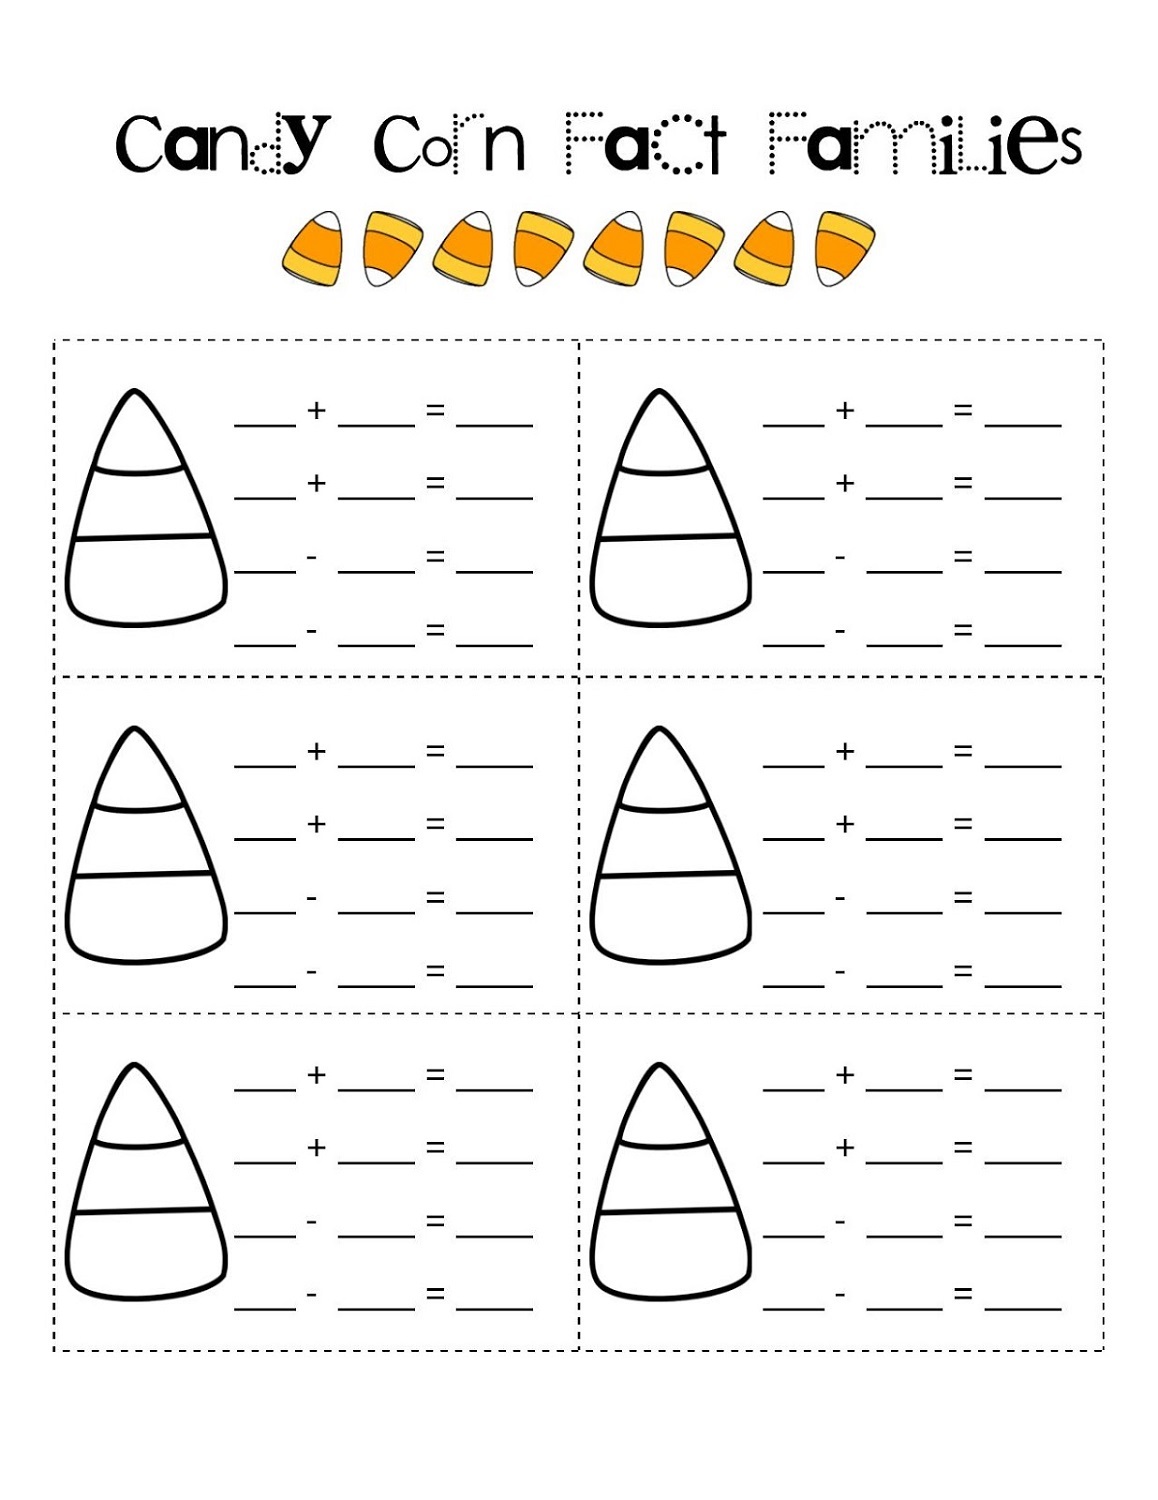 fact-family-worksheet-candy-corn